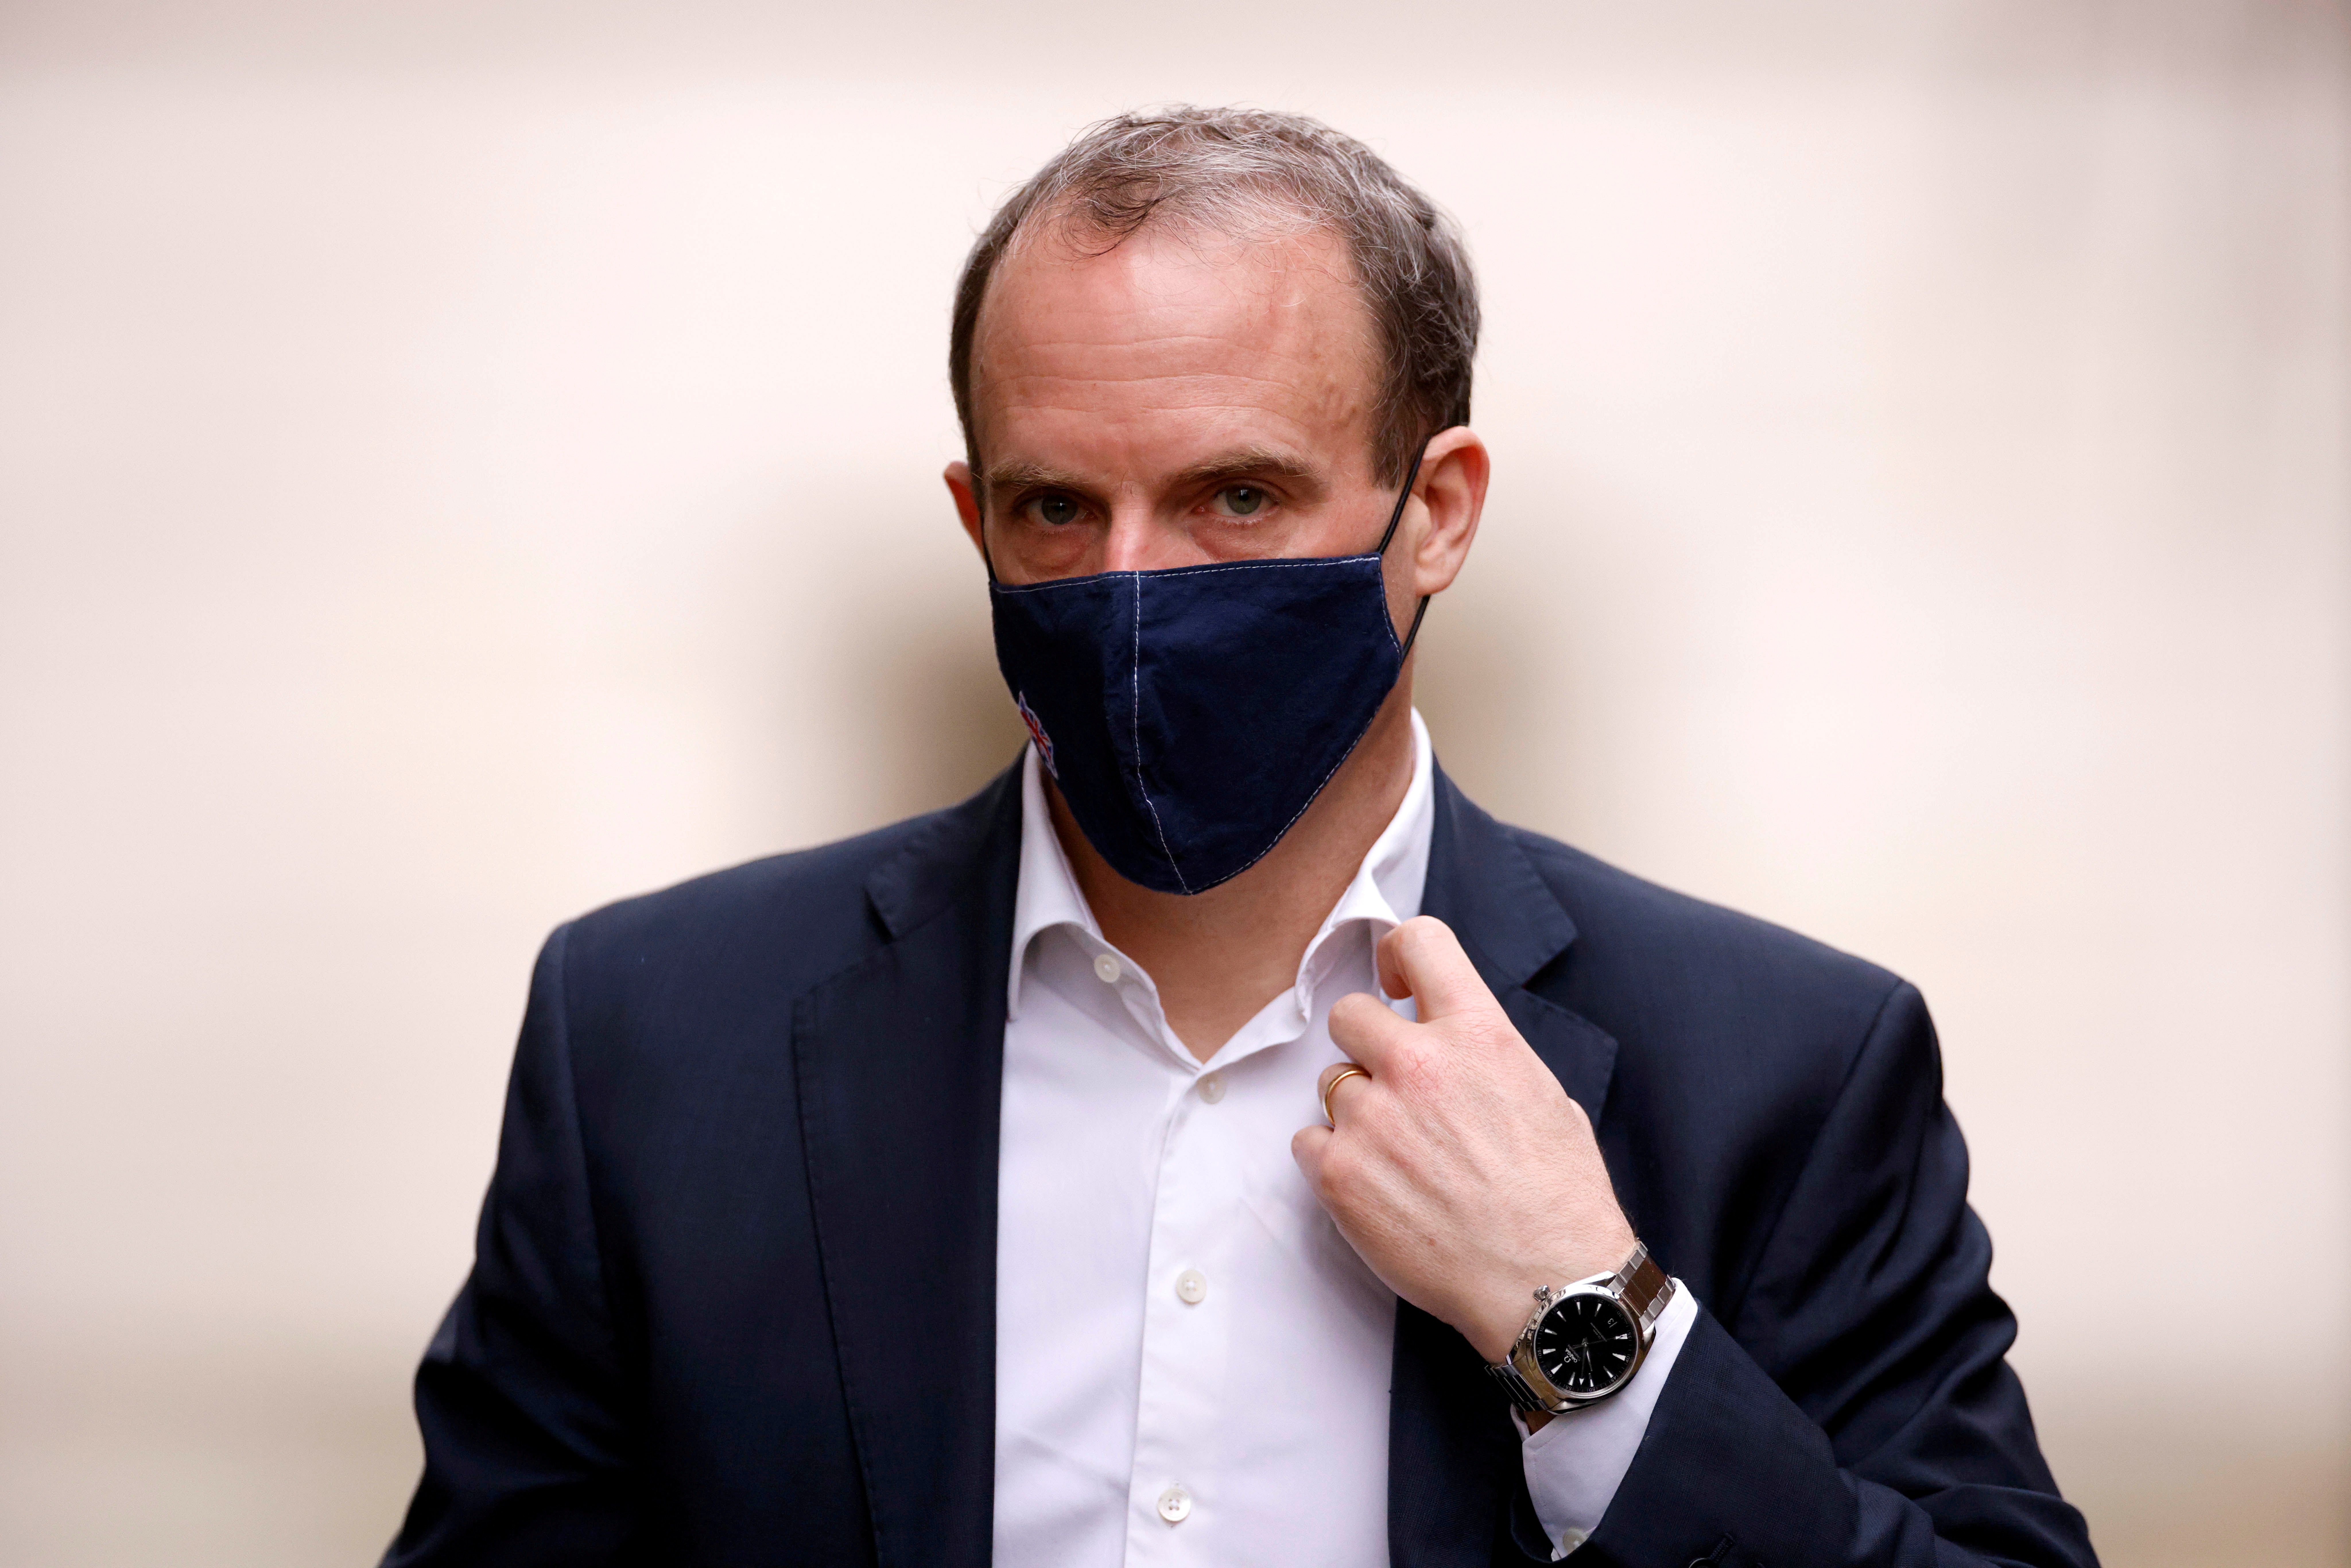 Dominic Raab has said that the government ‘can’t get ahead of the evidence’